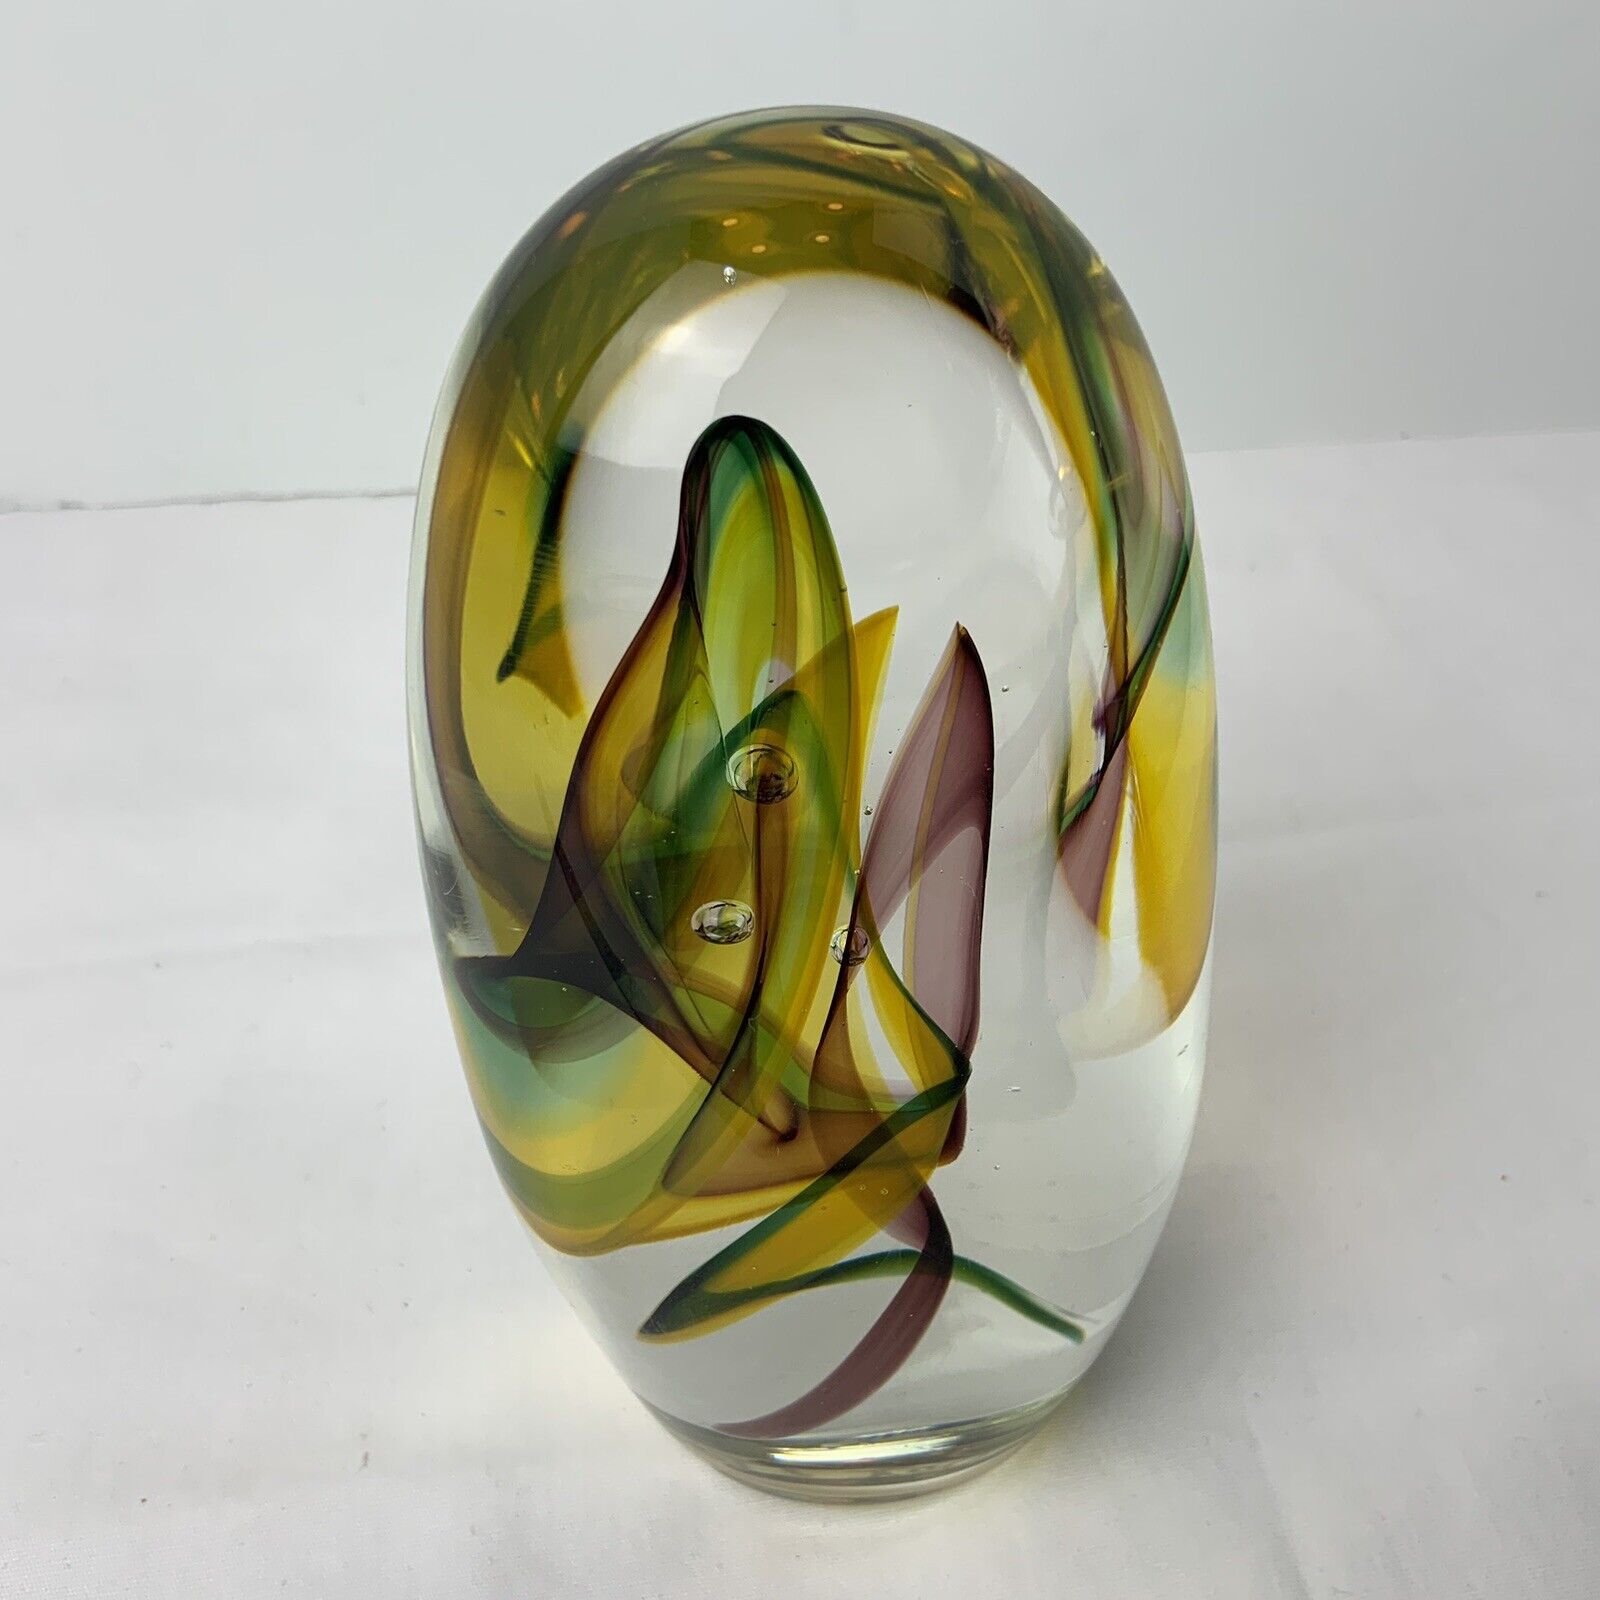 VTG Iridescent Multi Color Waves Art Glass Paperweight Signed Peet Robison 85